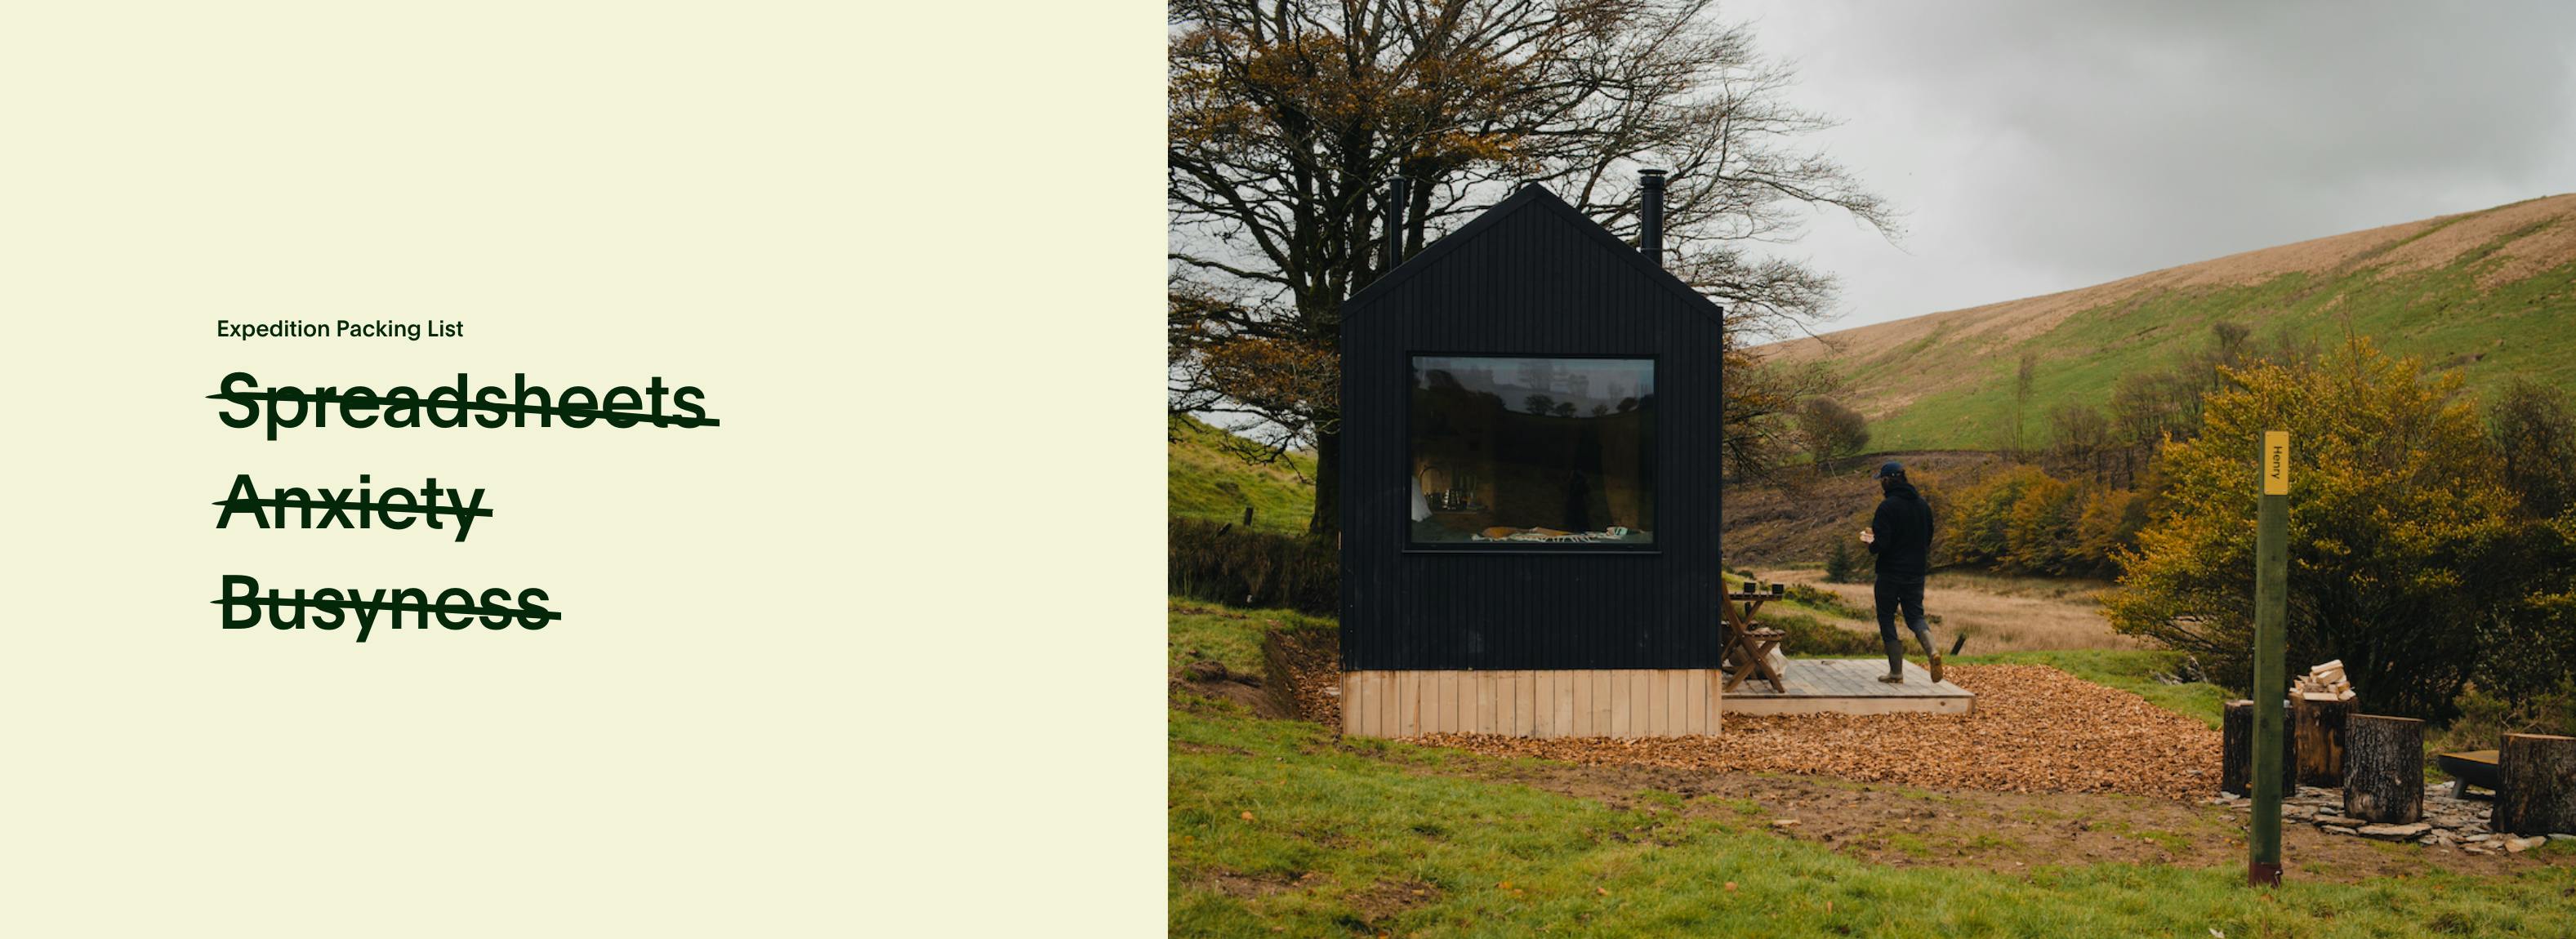 Sustainable cabin on a farm with a person walking and living a low-impact life.